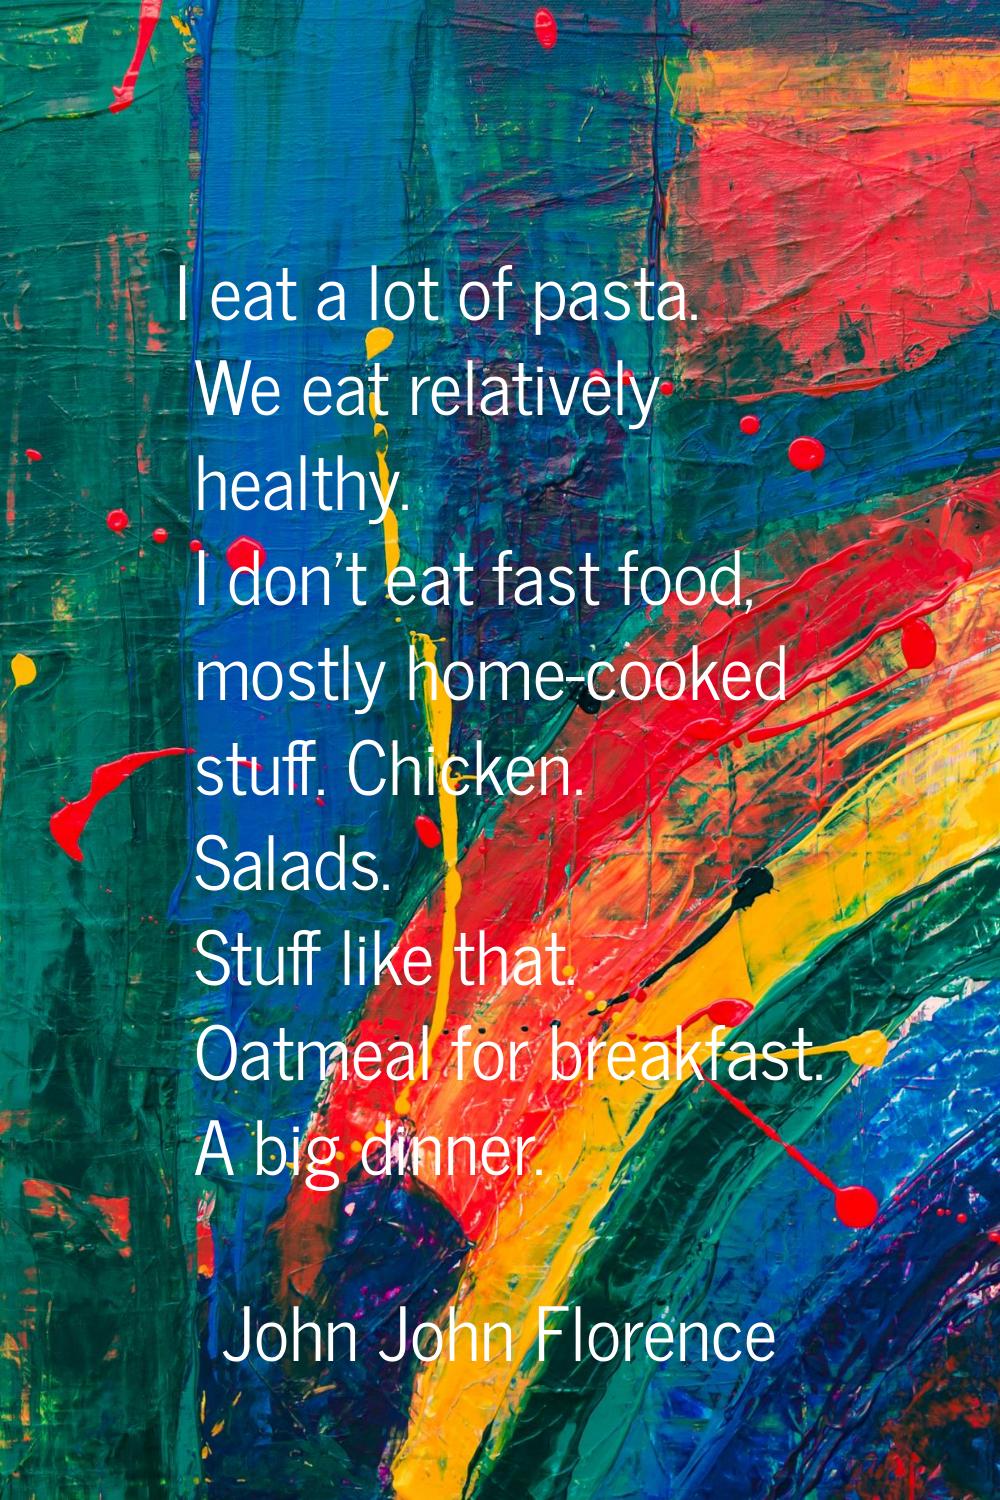 I eat a lot of pasta. We eat relatively healthy. I don't eat fast food, mostly home-cooked stuff. C